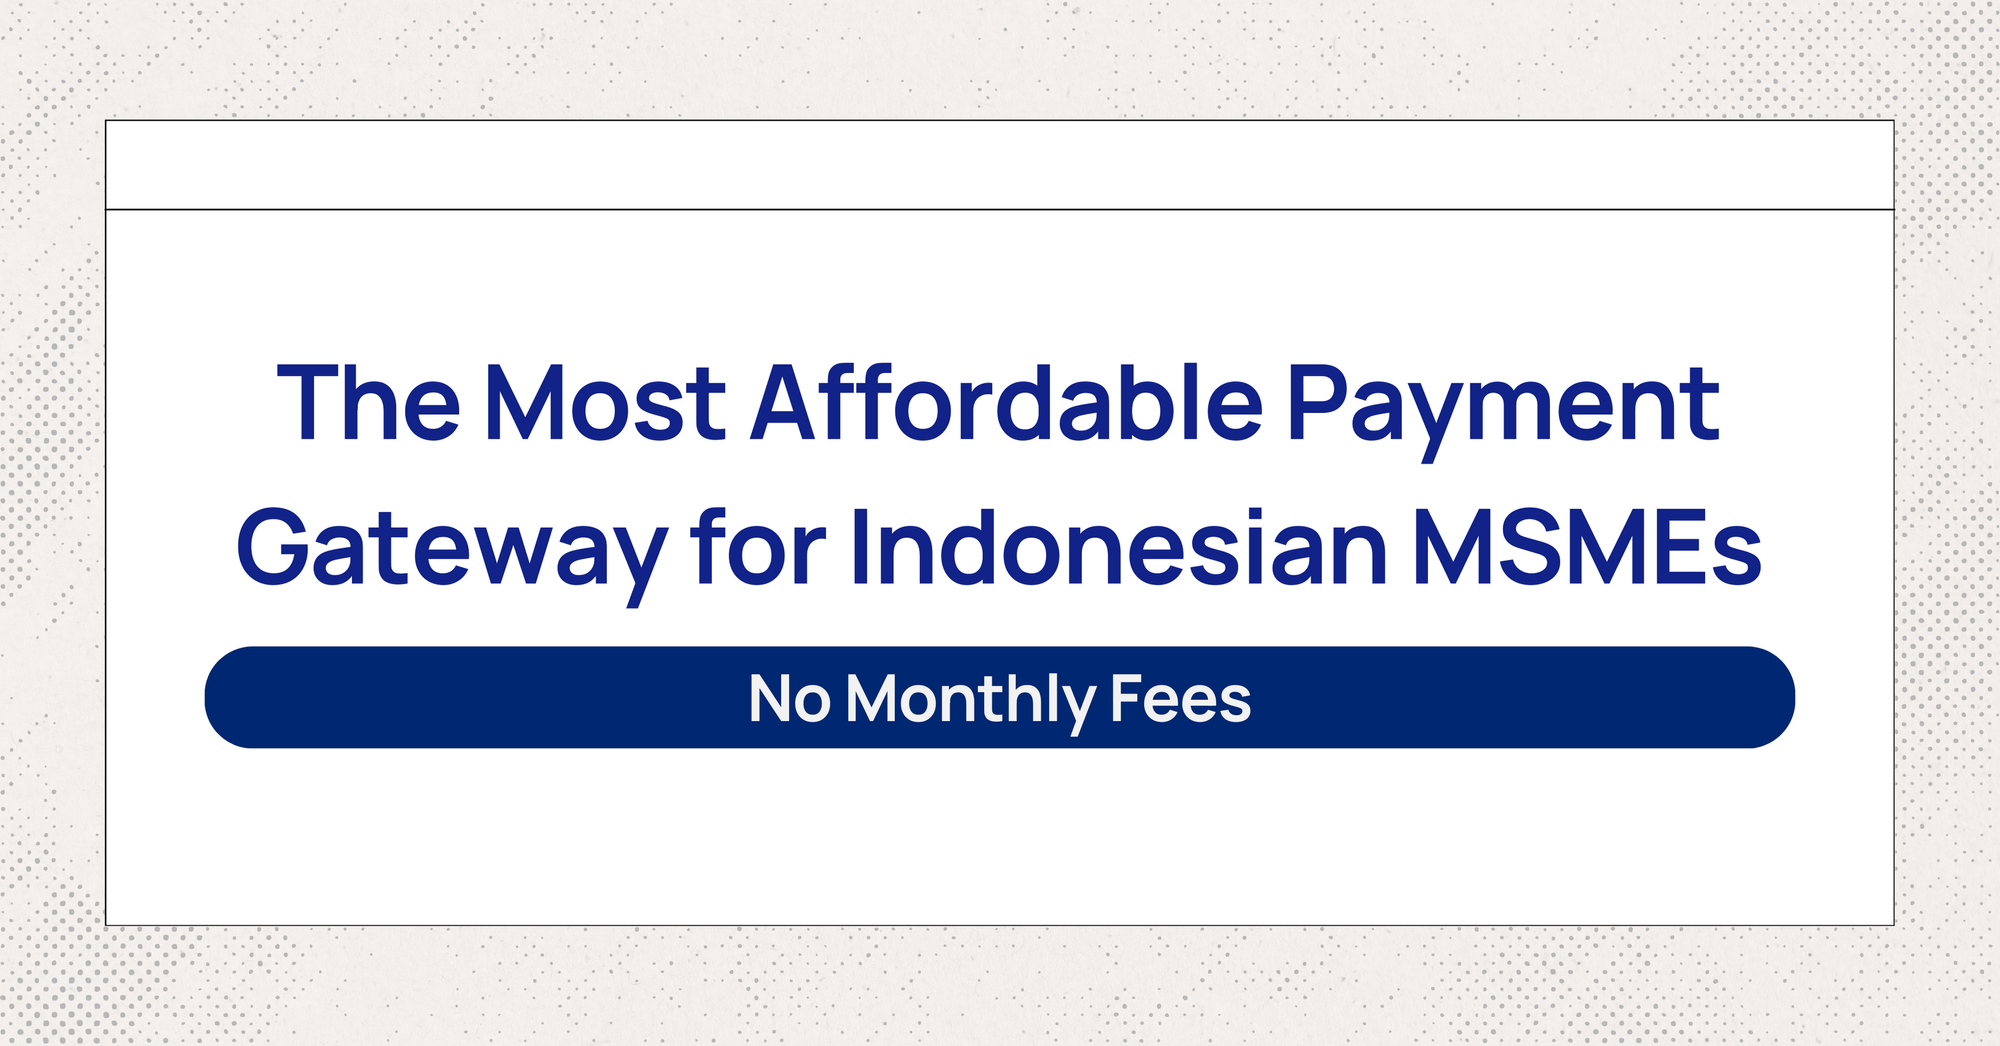 The Most Affordable Payment Gateway for Indonesian MSMEs: No Monthly Fees